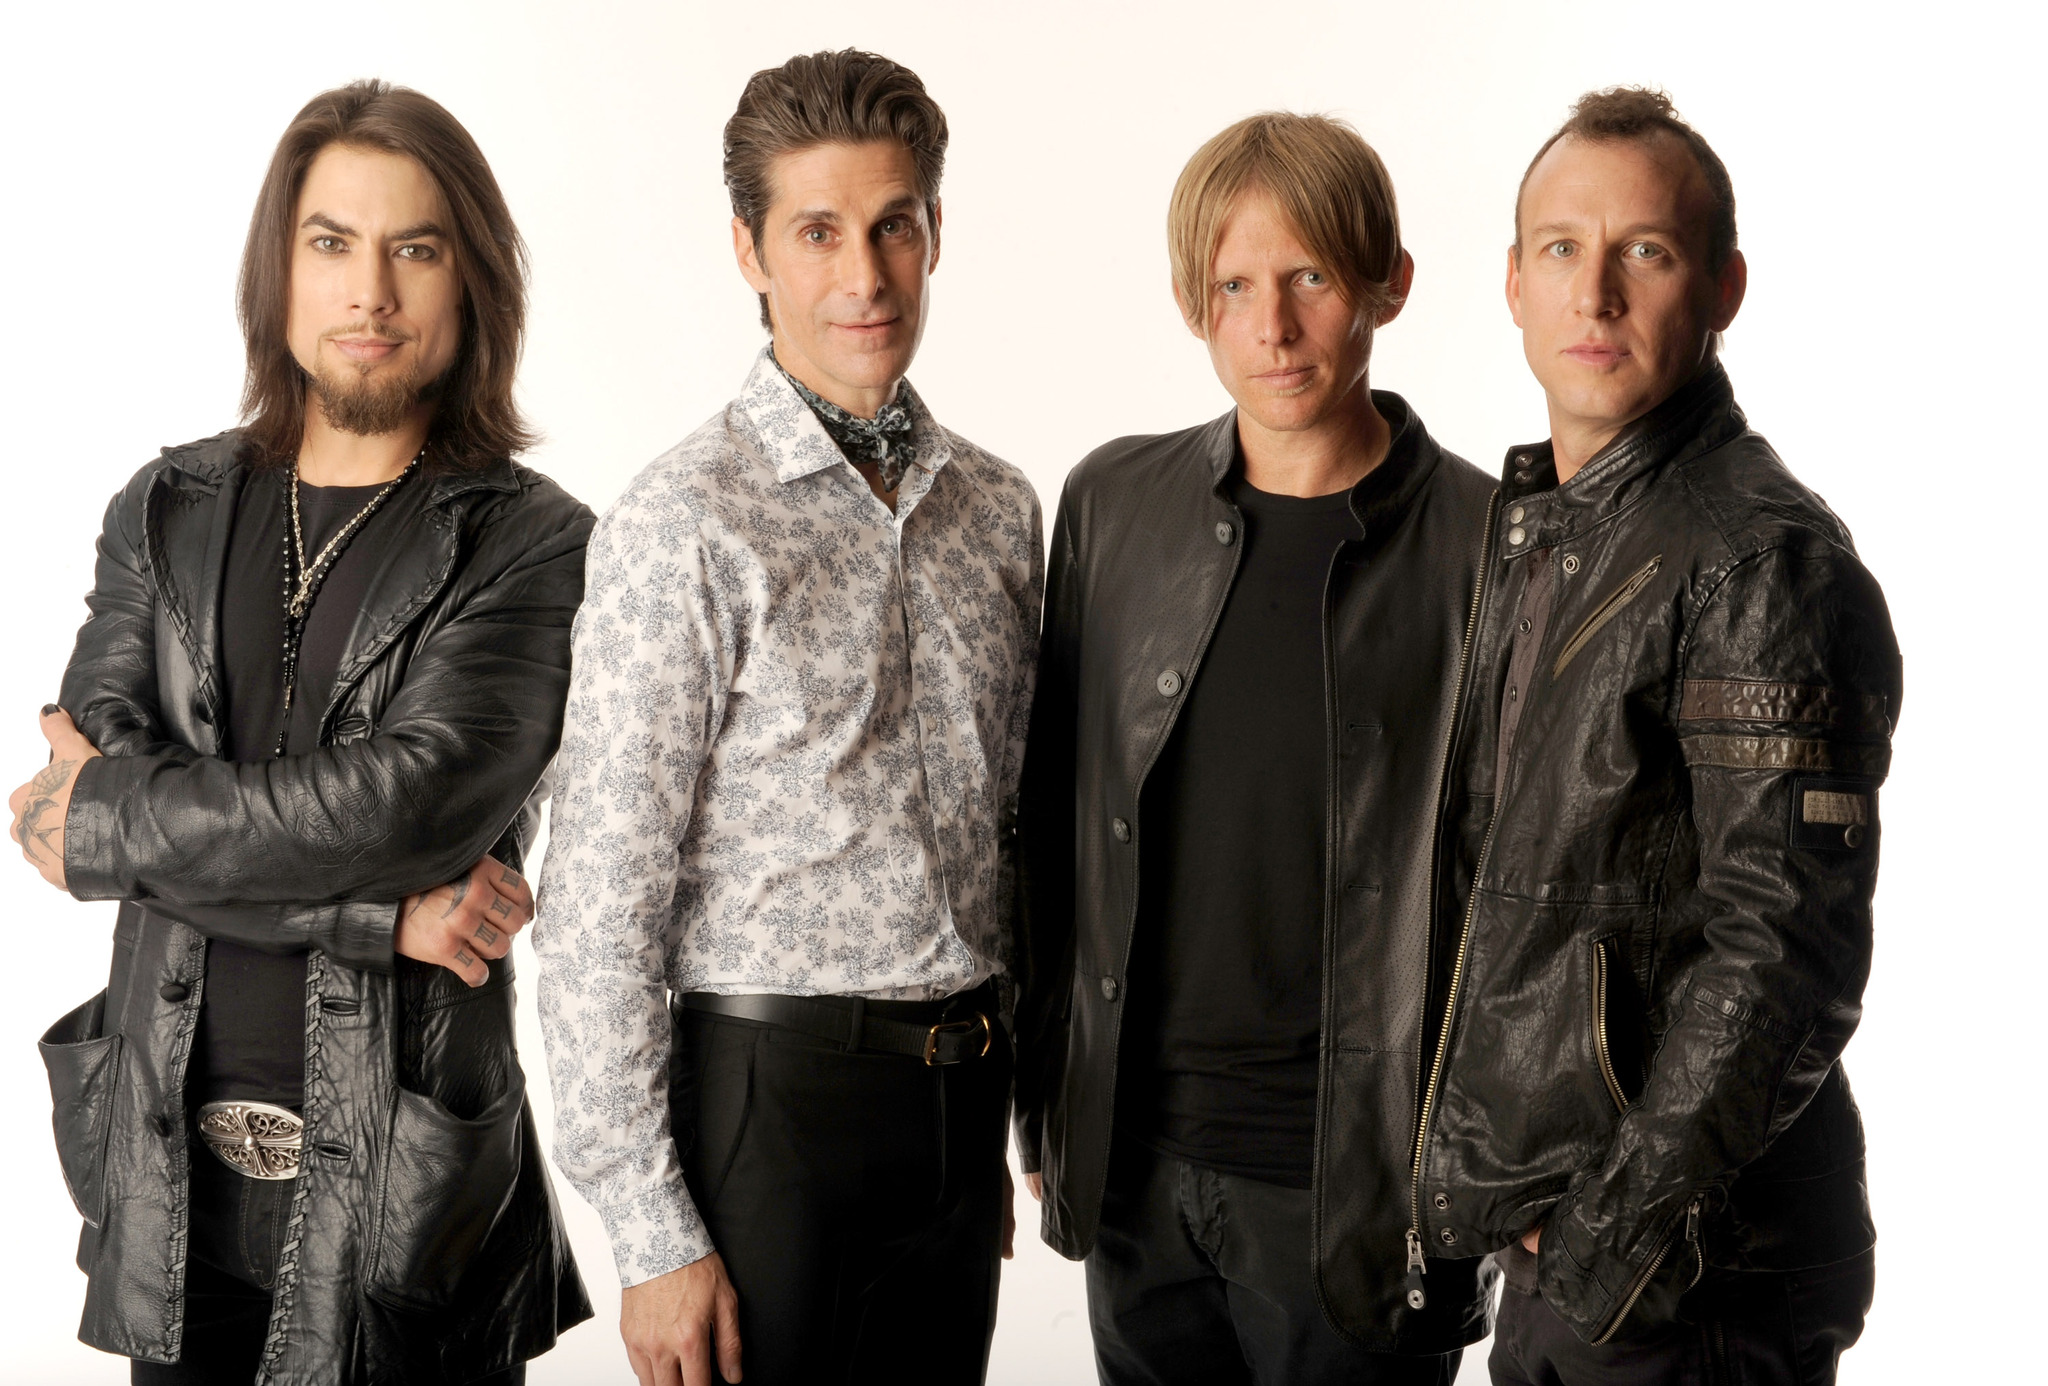 Dave Navarro, Perry Farrell, Stephen Perkins and Chris Chaney